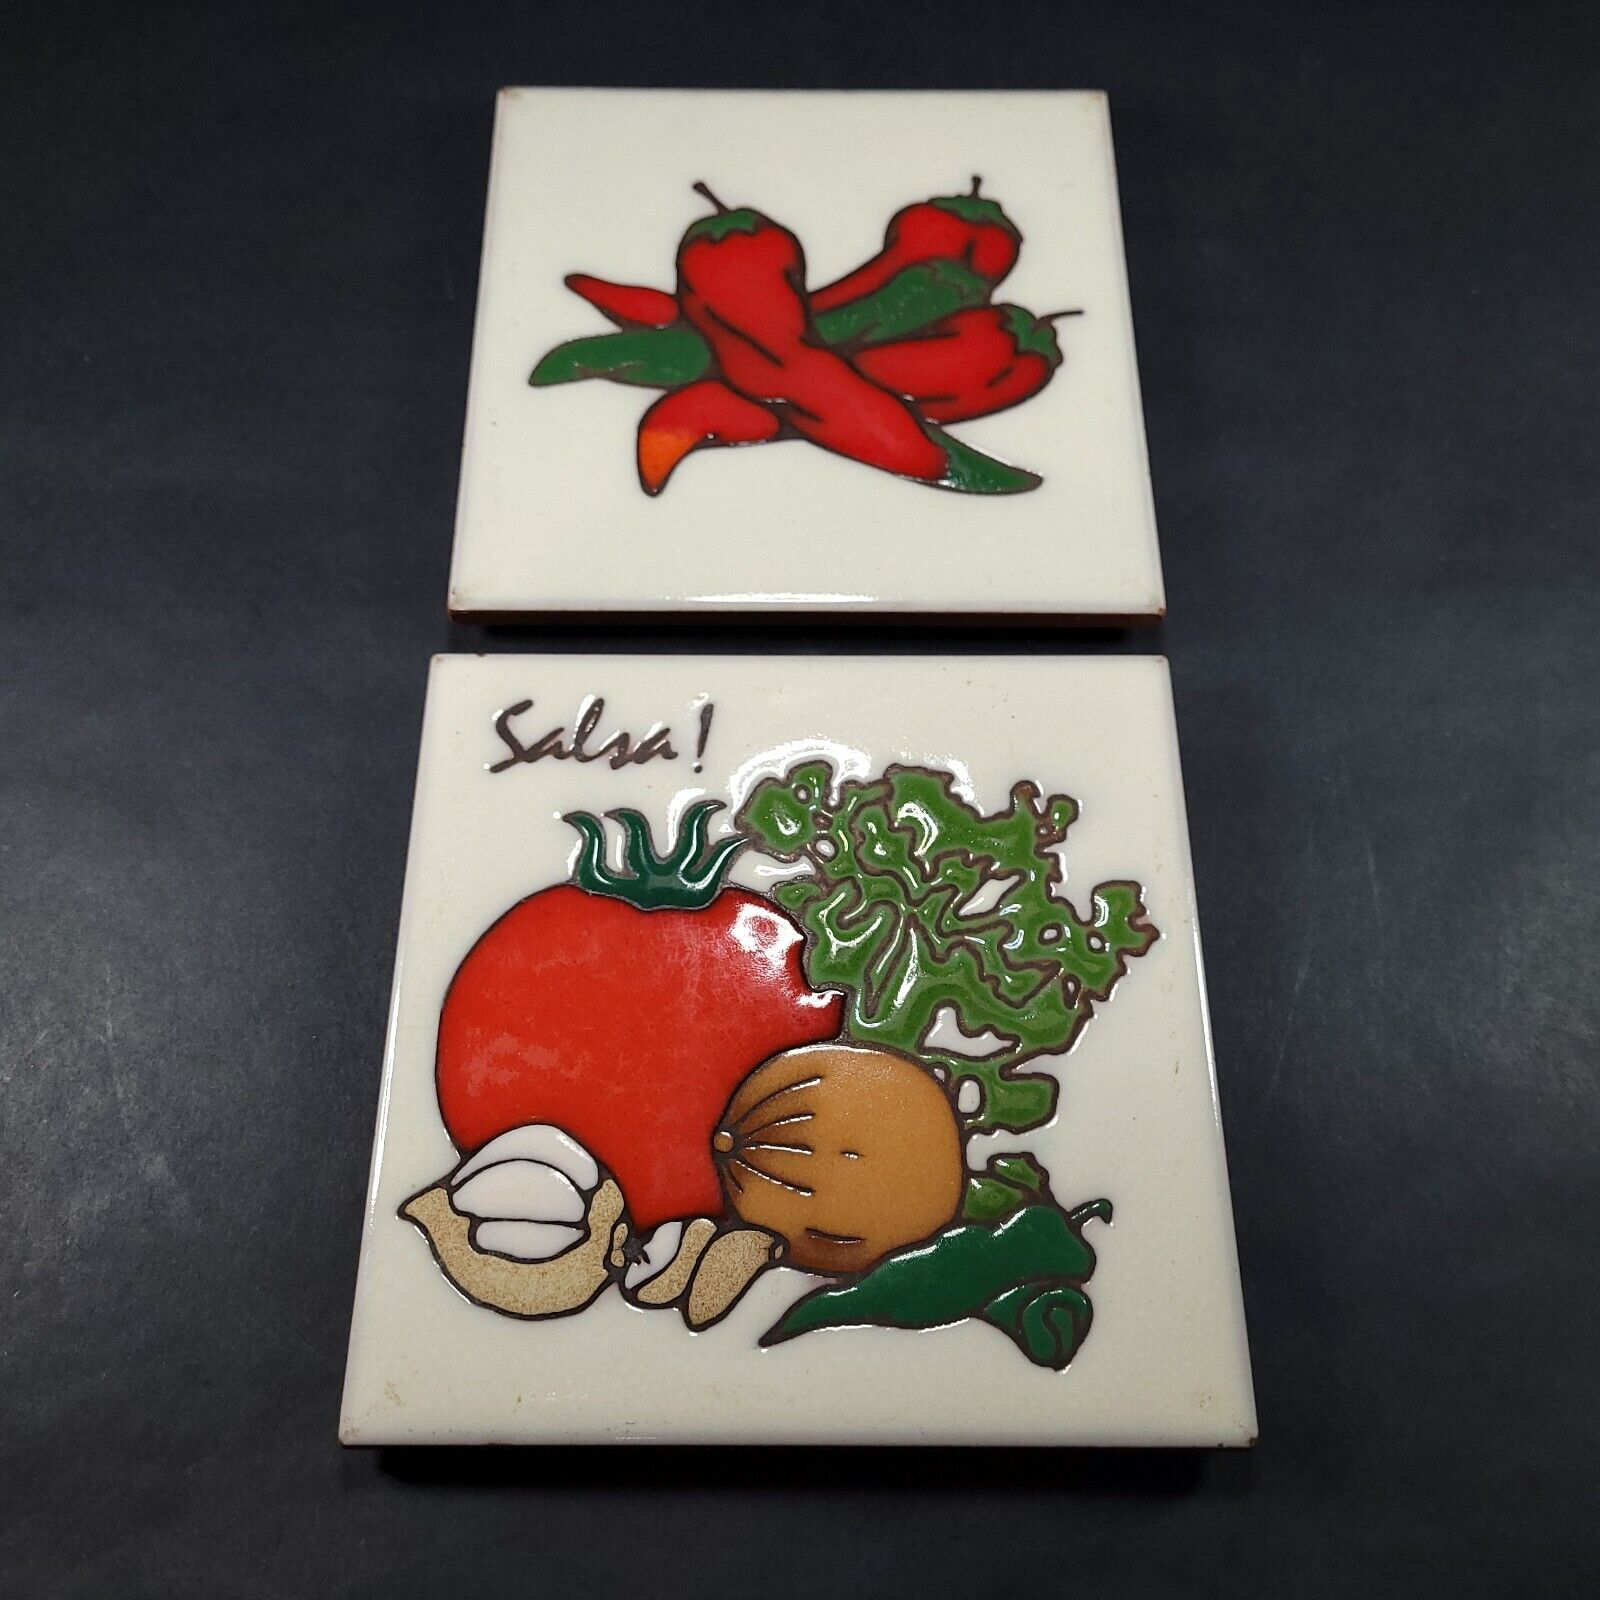 Masterworks Hand Crafted Ceramic Tile Trivet Salsa and Peppers set of 2 6x6